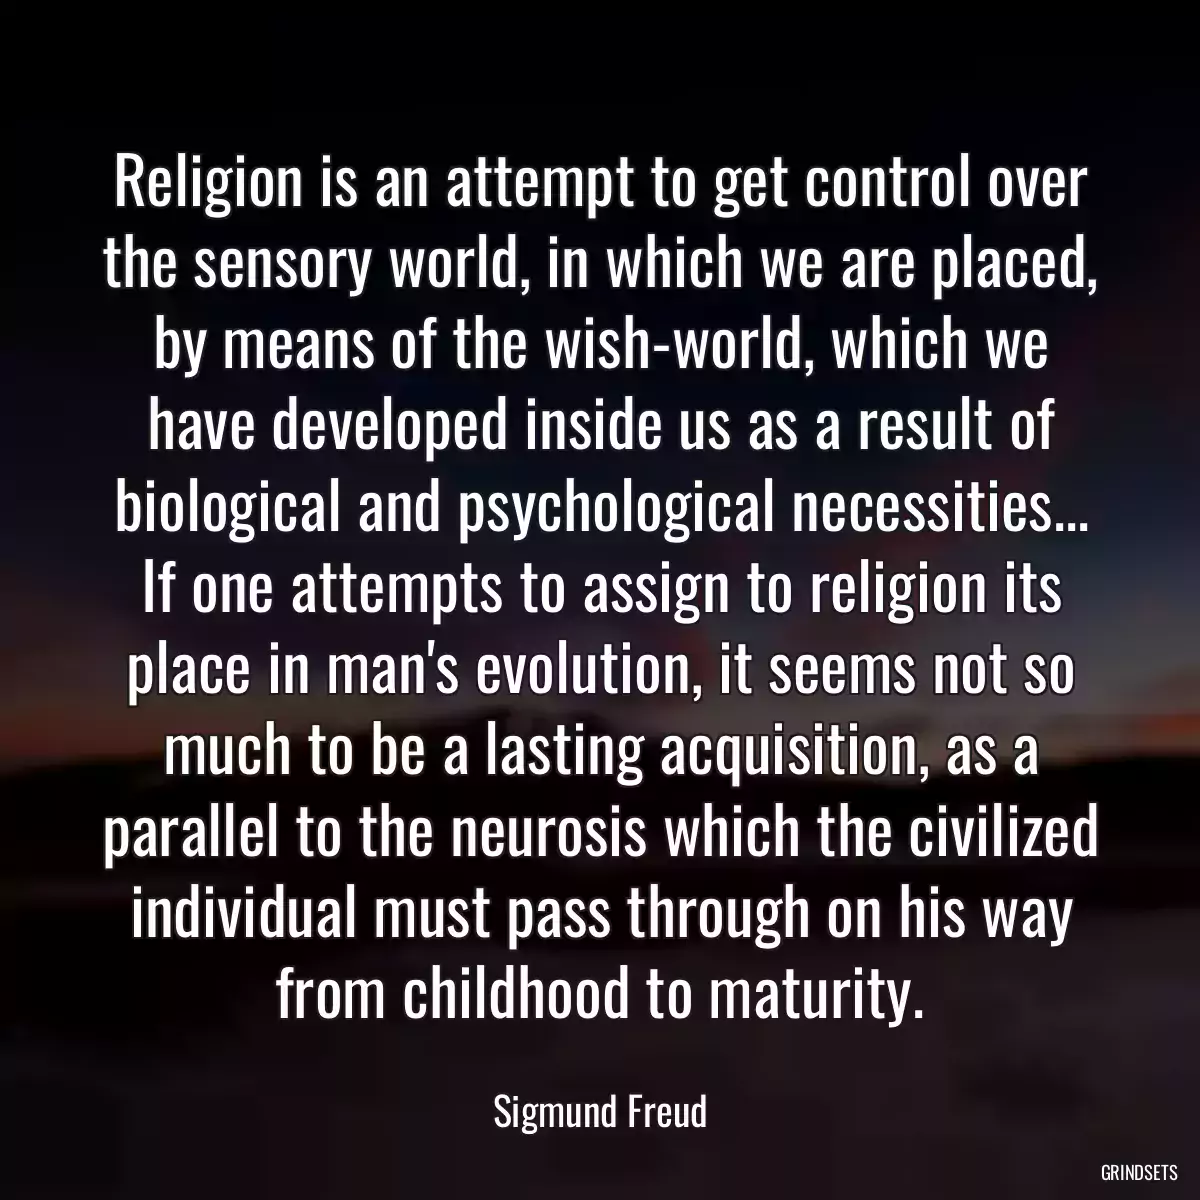 Religion is an attempt to get control over the sensory world, in which we are placed, by means of the wish-world, which we have developed inside us as a result of biological and psychological necessities... If one attempts to assign to religion its place in man\'s evolution, it seems not so much to be a lasting acquisition, as a parallel to the neurosis which the civilized individual must pass through on his way from childhood to maturity.